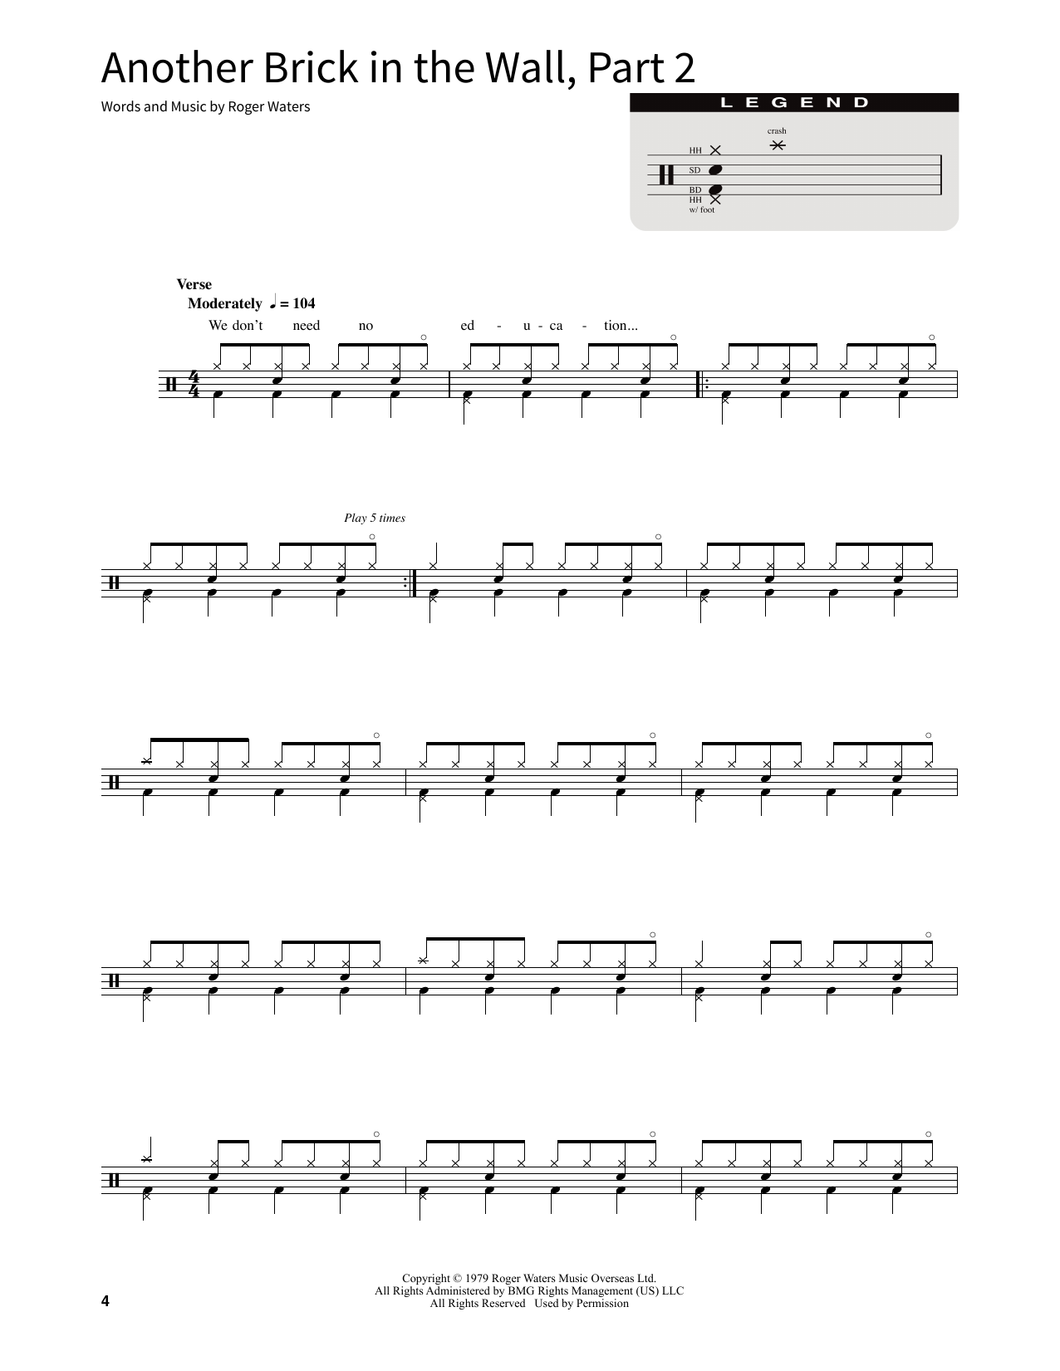 Another Brick in the Wall (Part 2) - Pink Floyd - Full Drum Transcription / Drum Sheet Music - SheetMusicDirect SORD